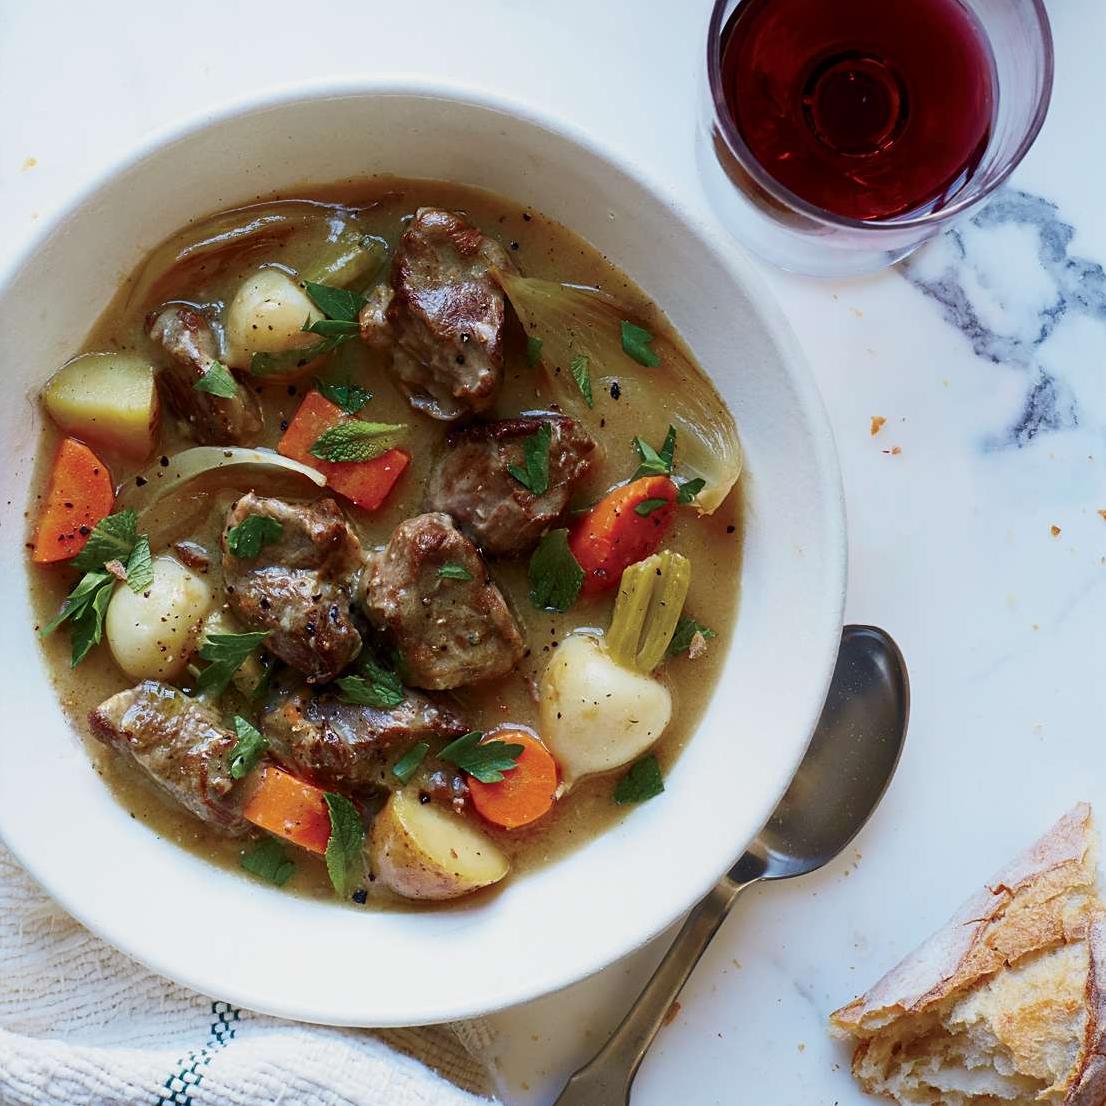  Tender pieces of lamb soak up the flavors of carrots, onions and potatoes in this traditional Irish stew.